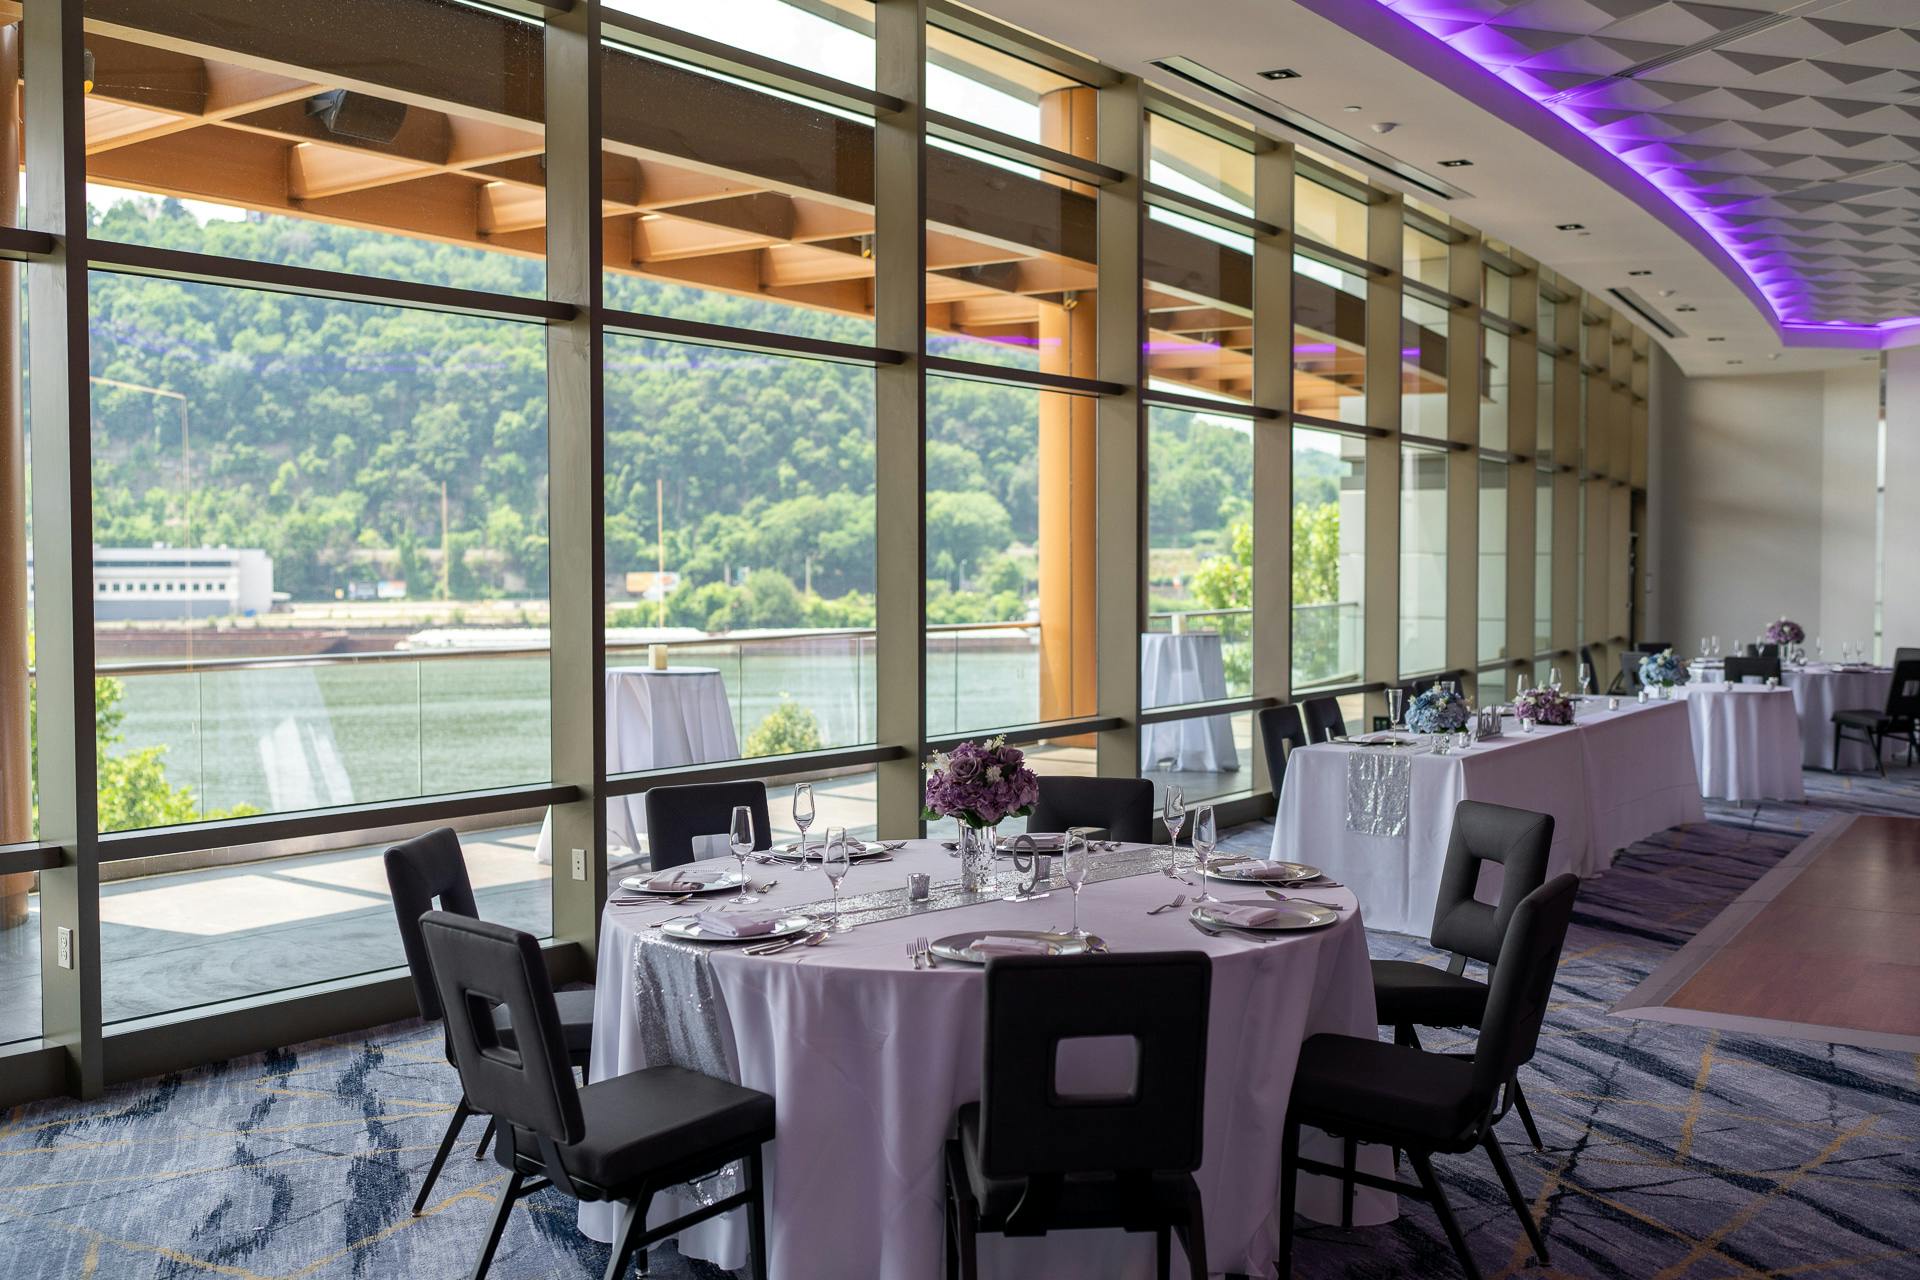 RIVERS CASINO PITTSBURGH ADDS AND UPDATES RIVERFRONT BALLROOMS